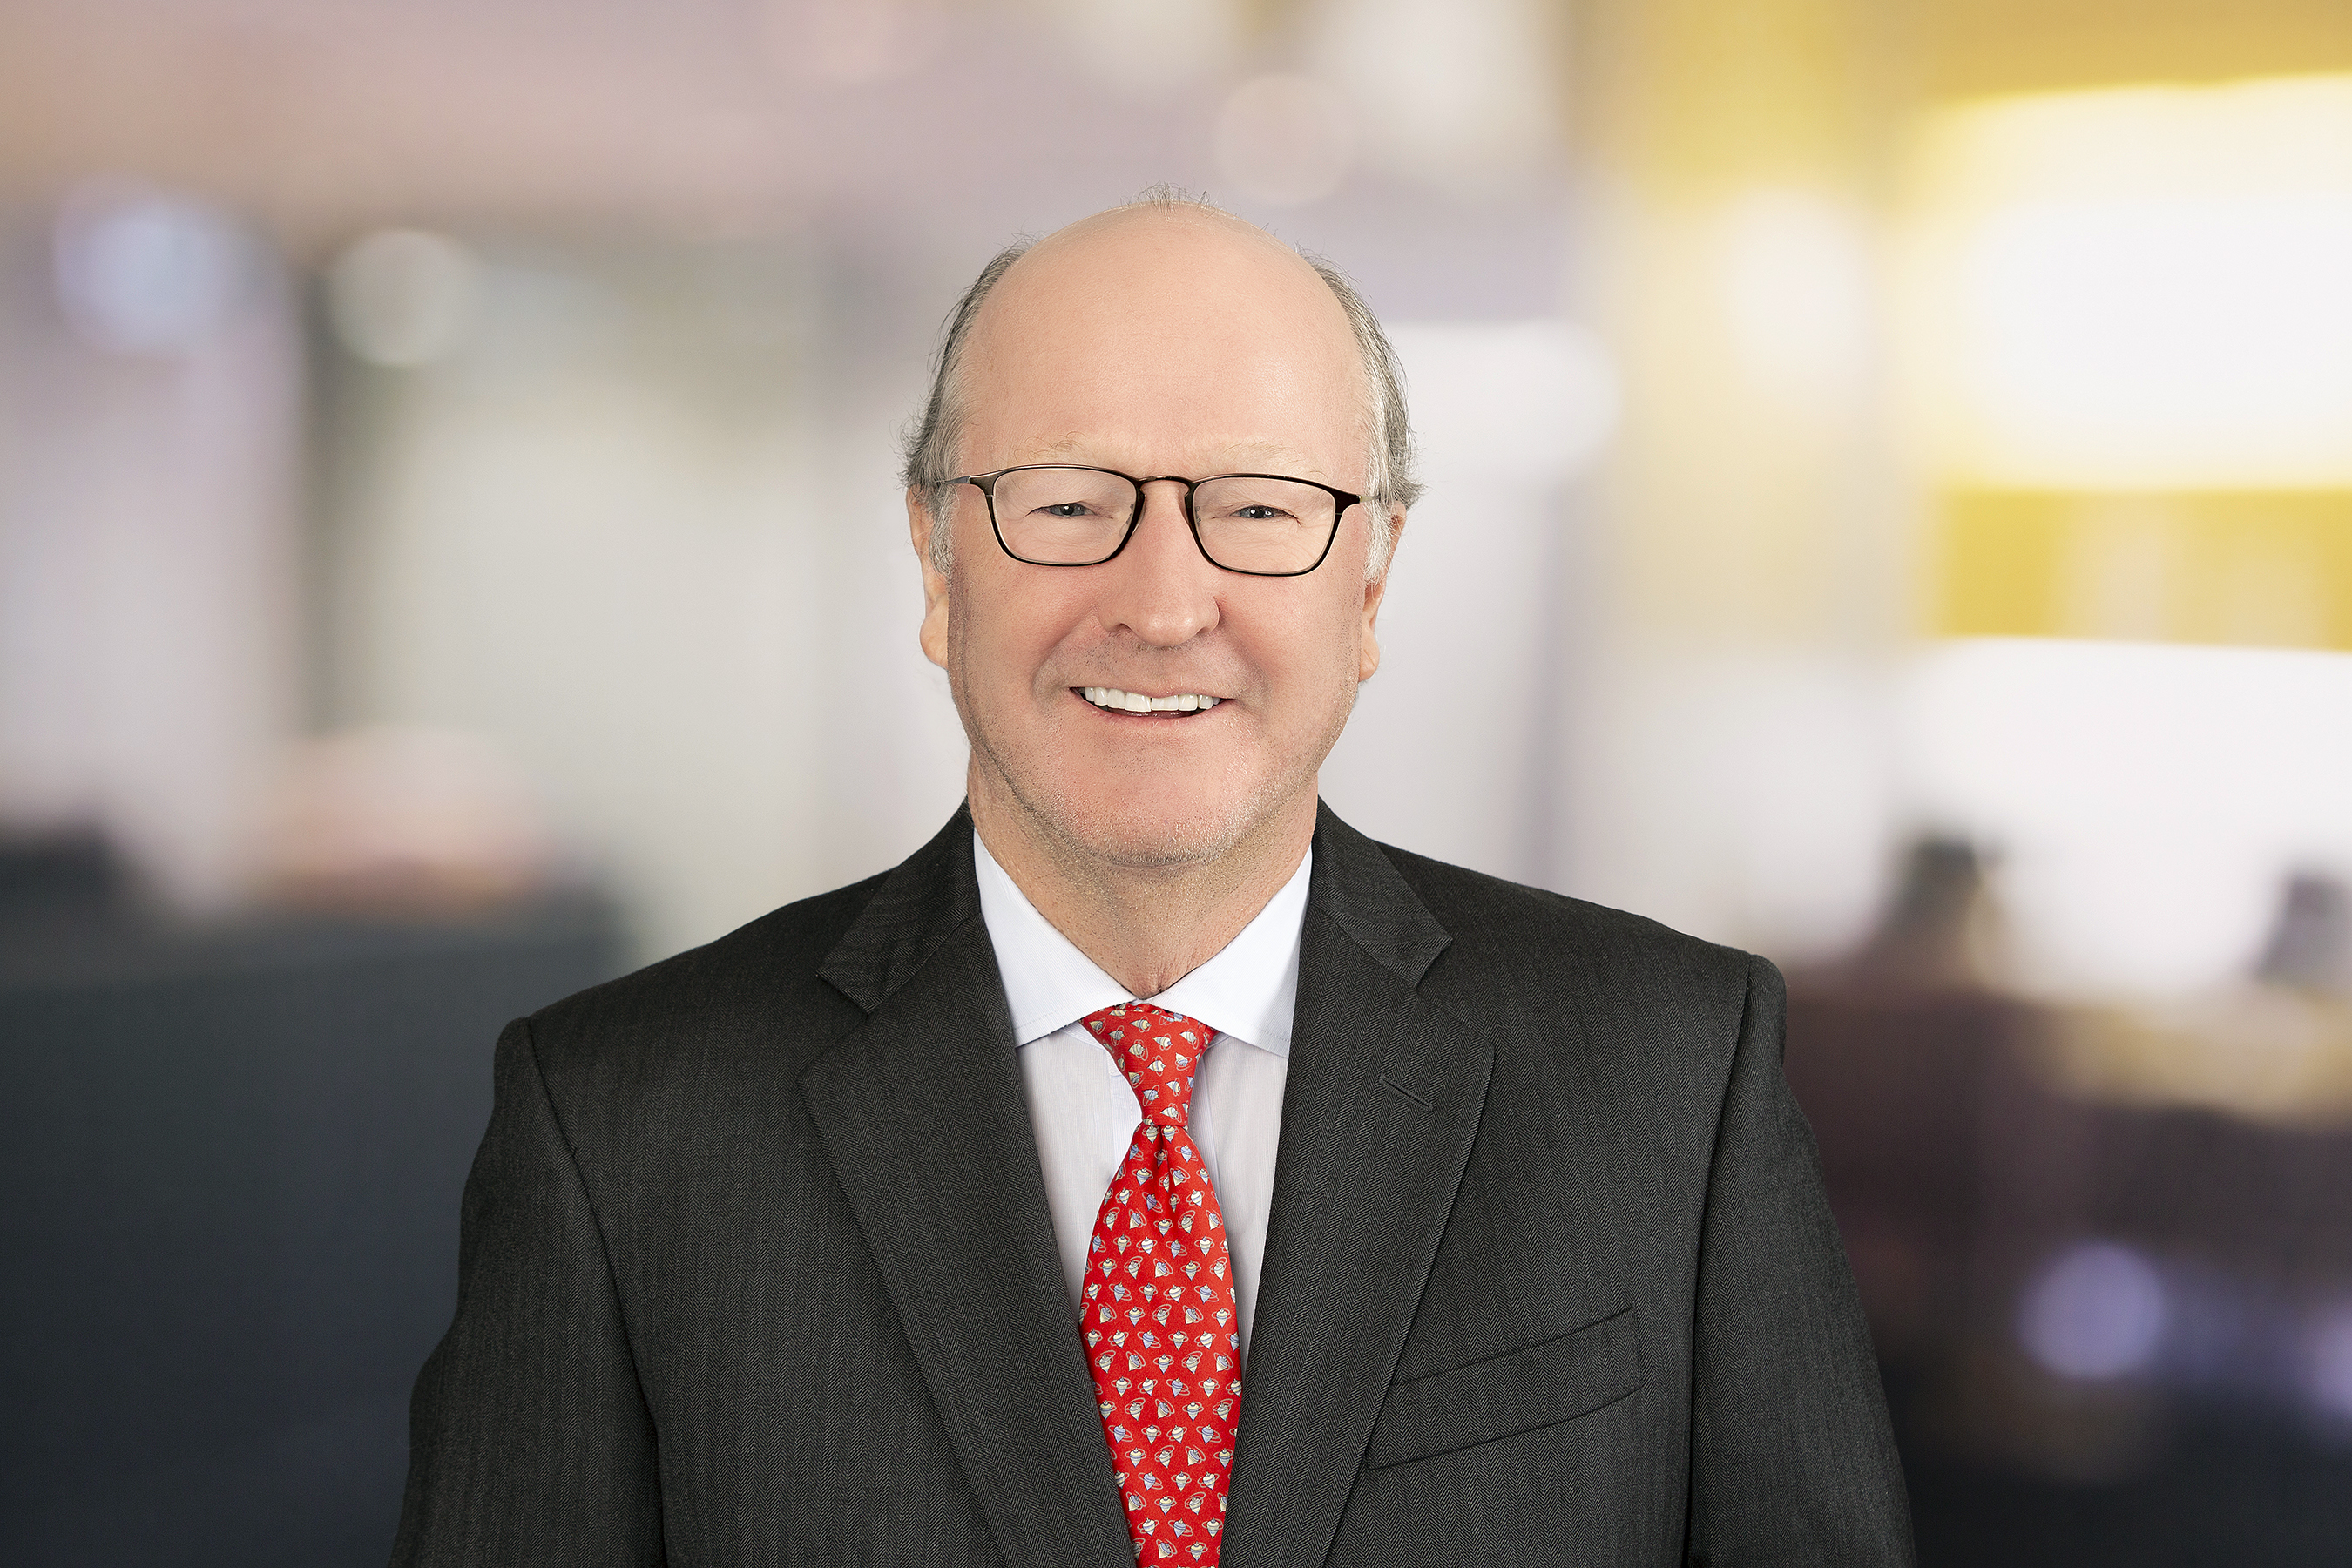 Commercial real estate expert Peter Hennessy has joined Savills as a vice chairman, specializing in tenant representation. His arrival strengthens the firm's position in the New York Tri-State region and builds on the company's growth in the United States and Canada.